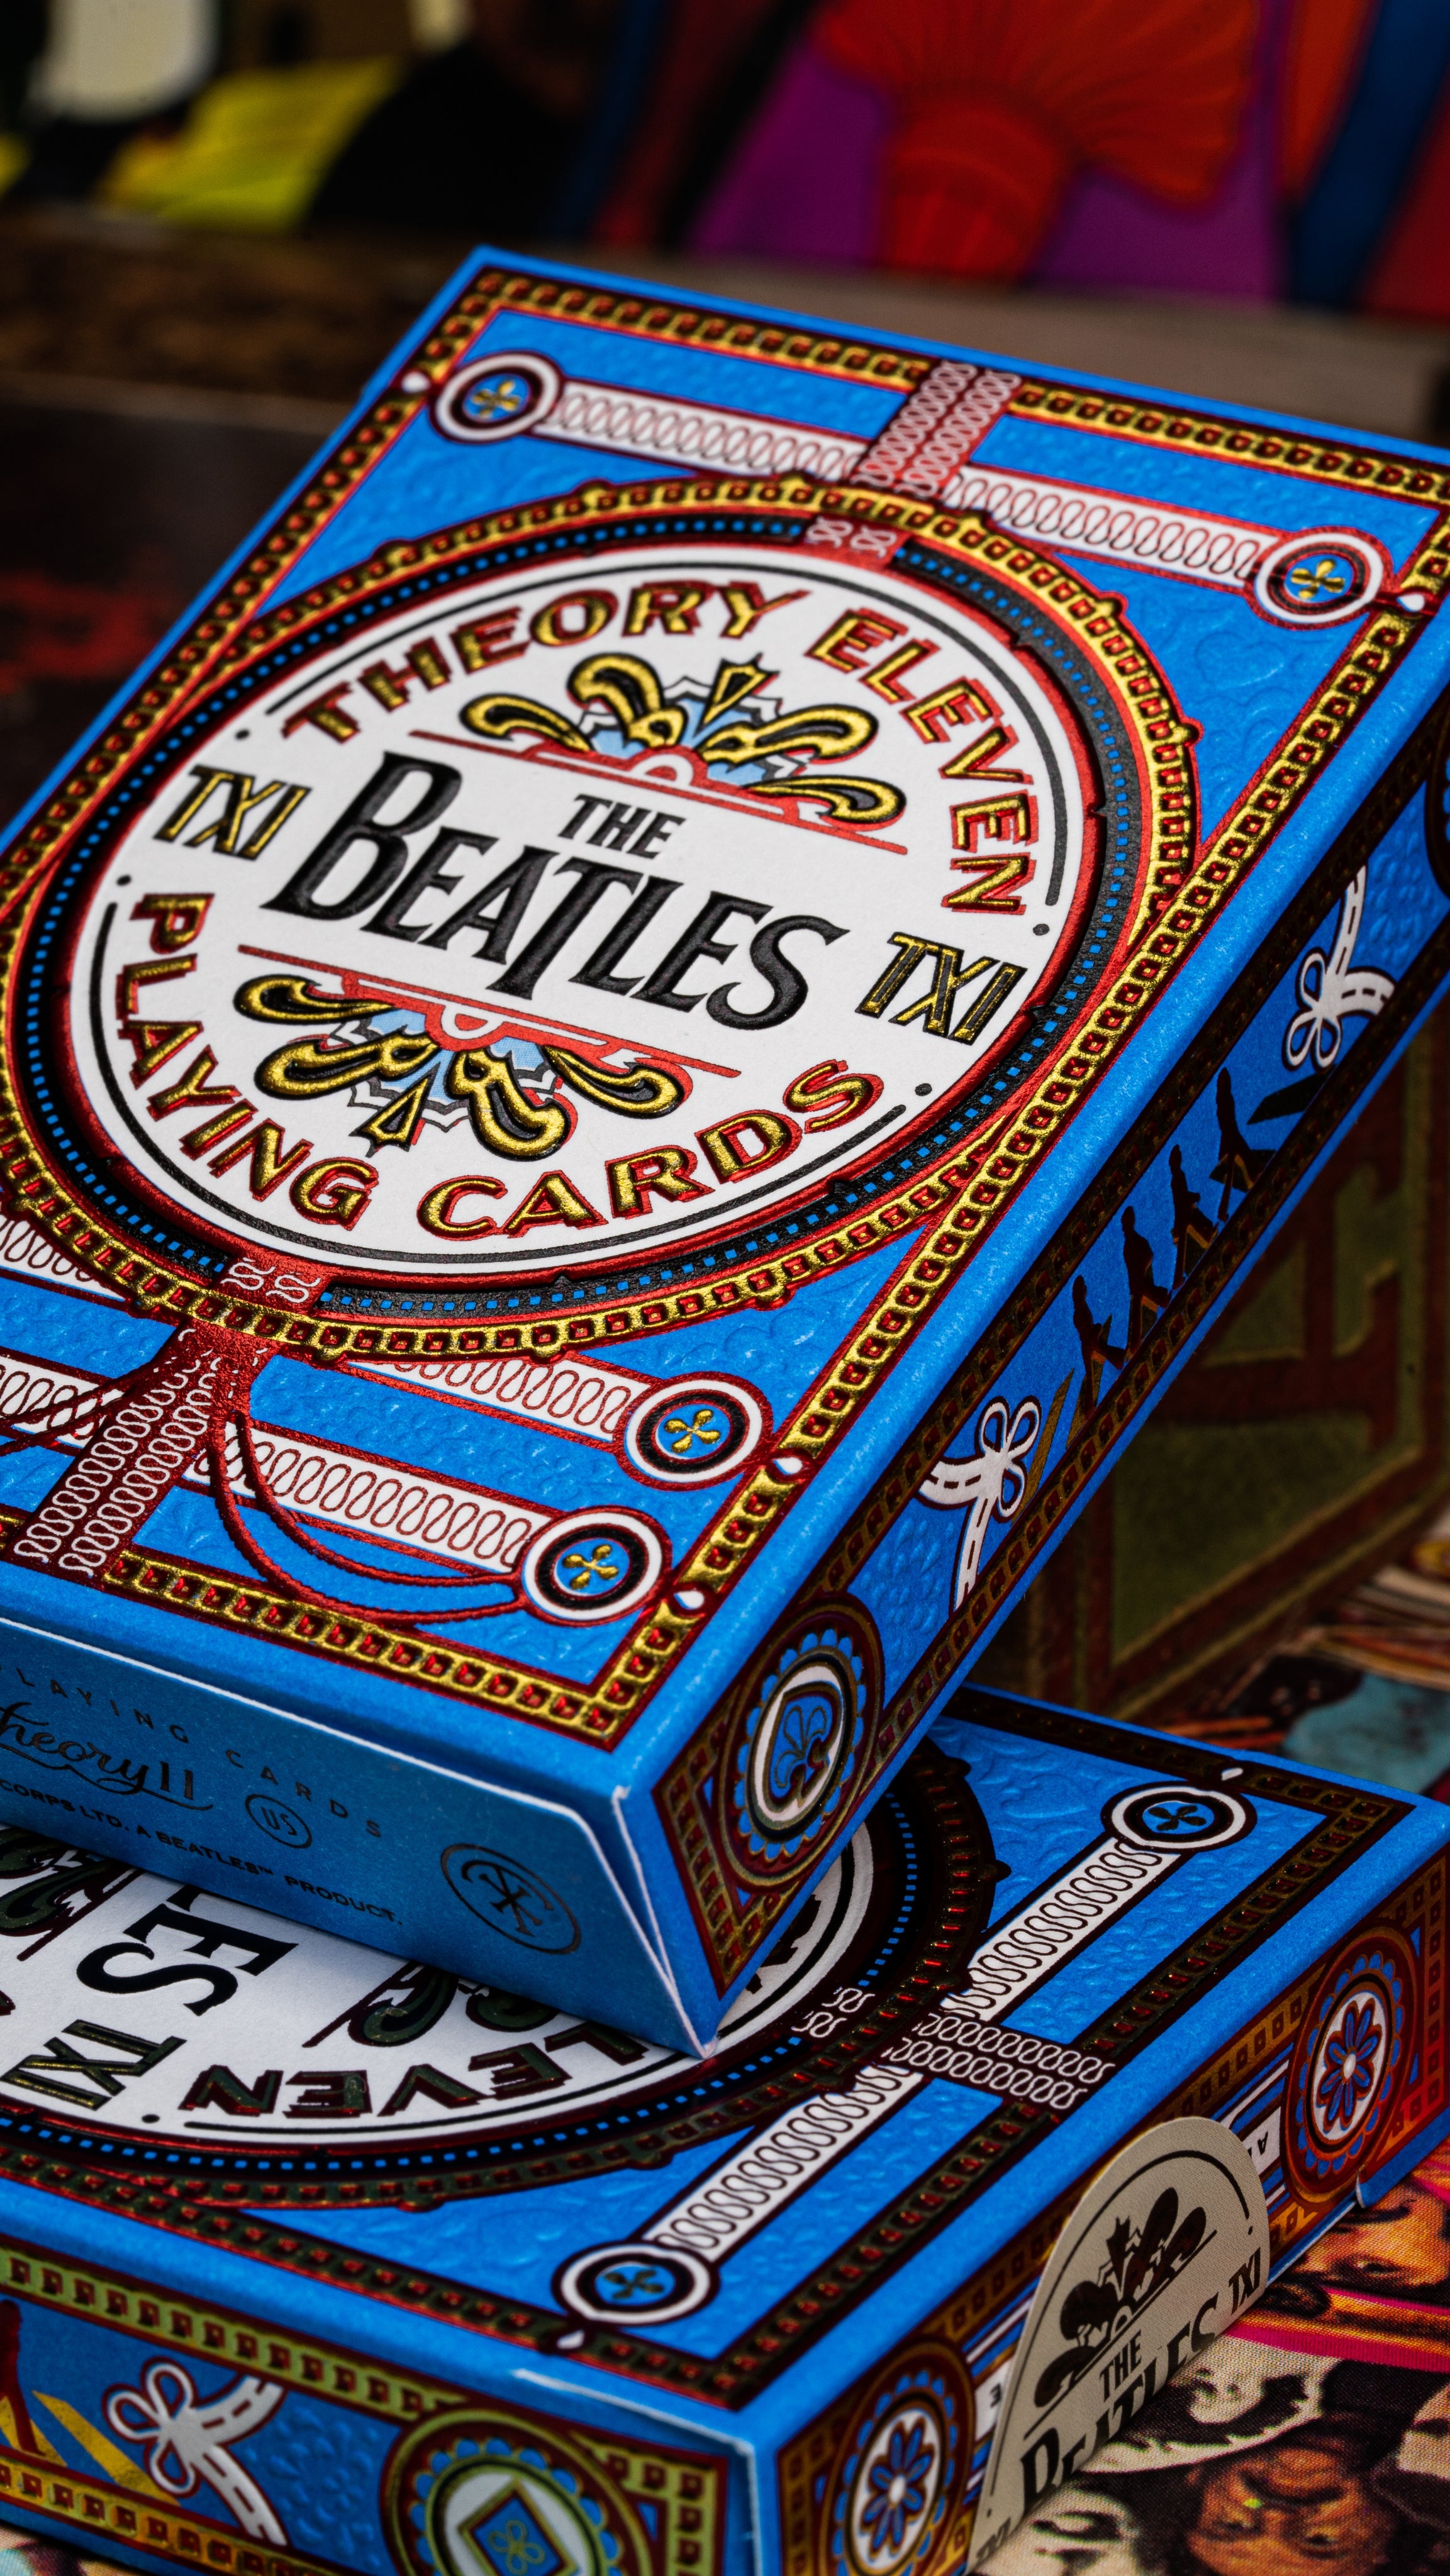 theory11 Playing Cards: The Beatles